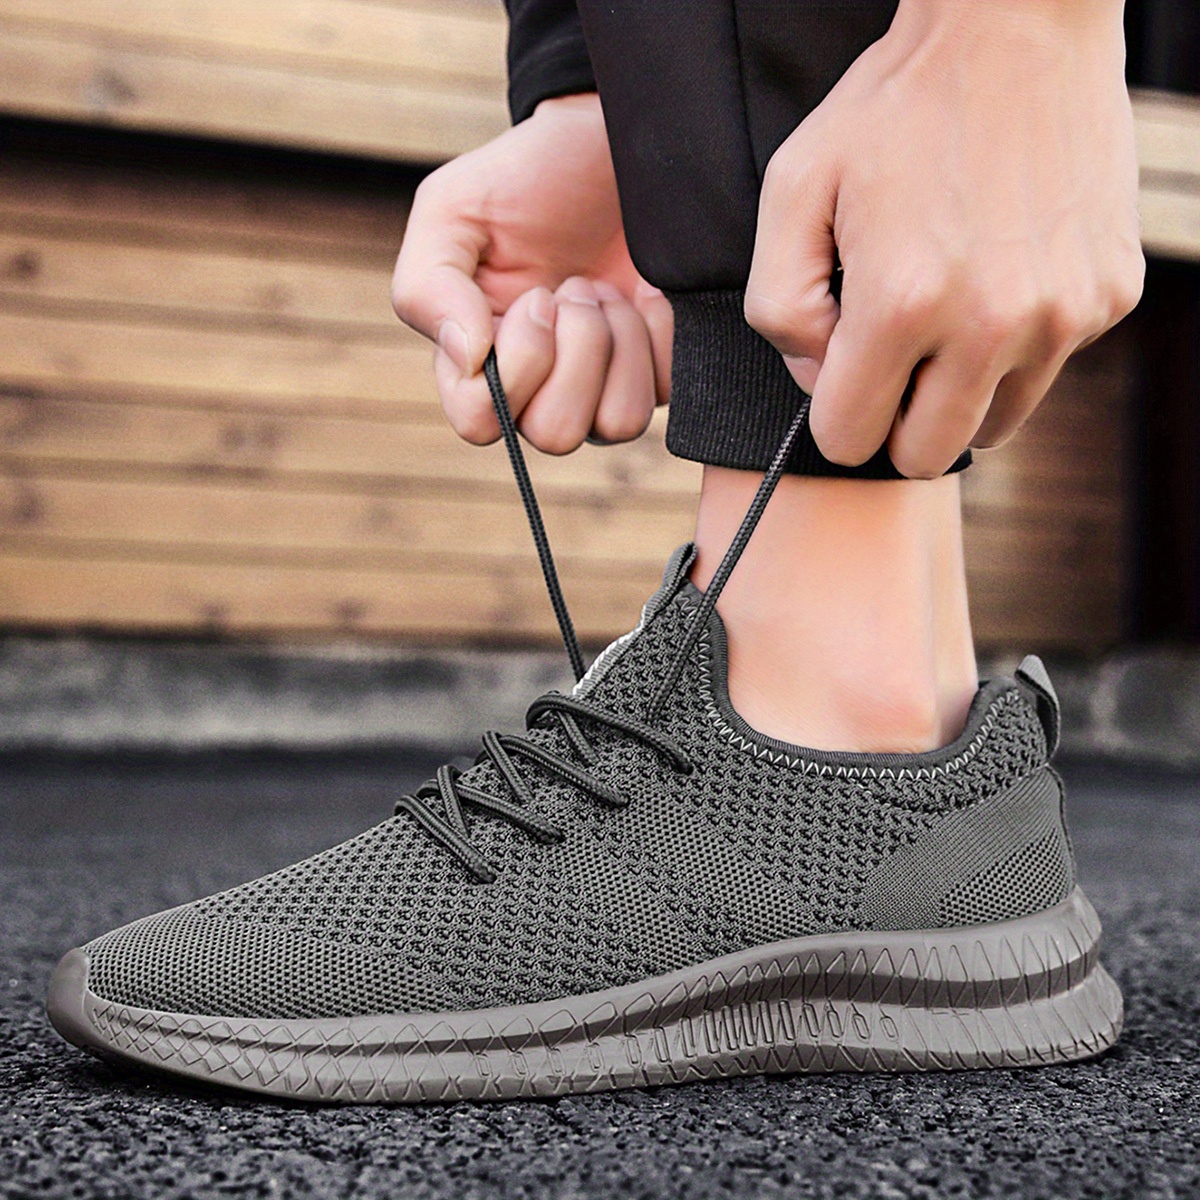 mens trendy breathable lace up knit sneakers with assorted colors casual outdoor running walking shoes details 24